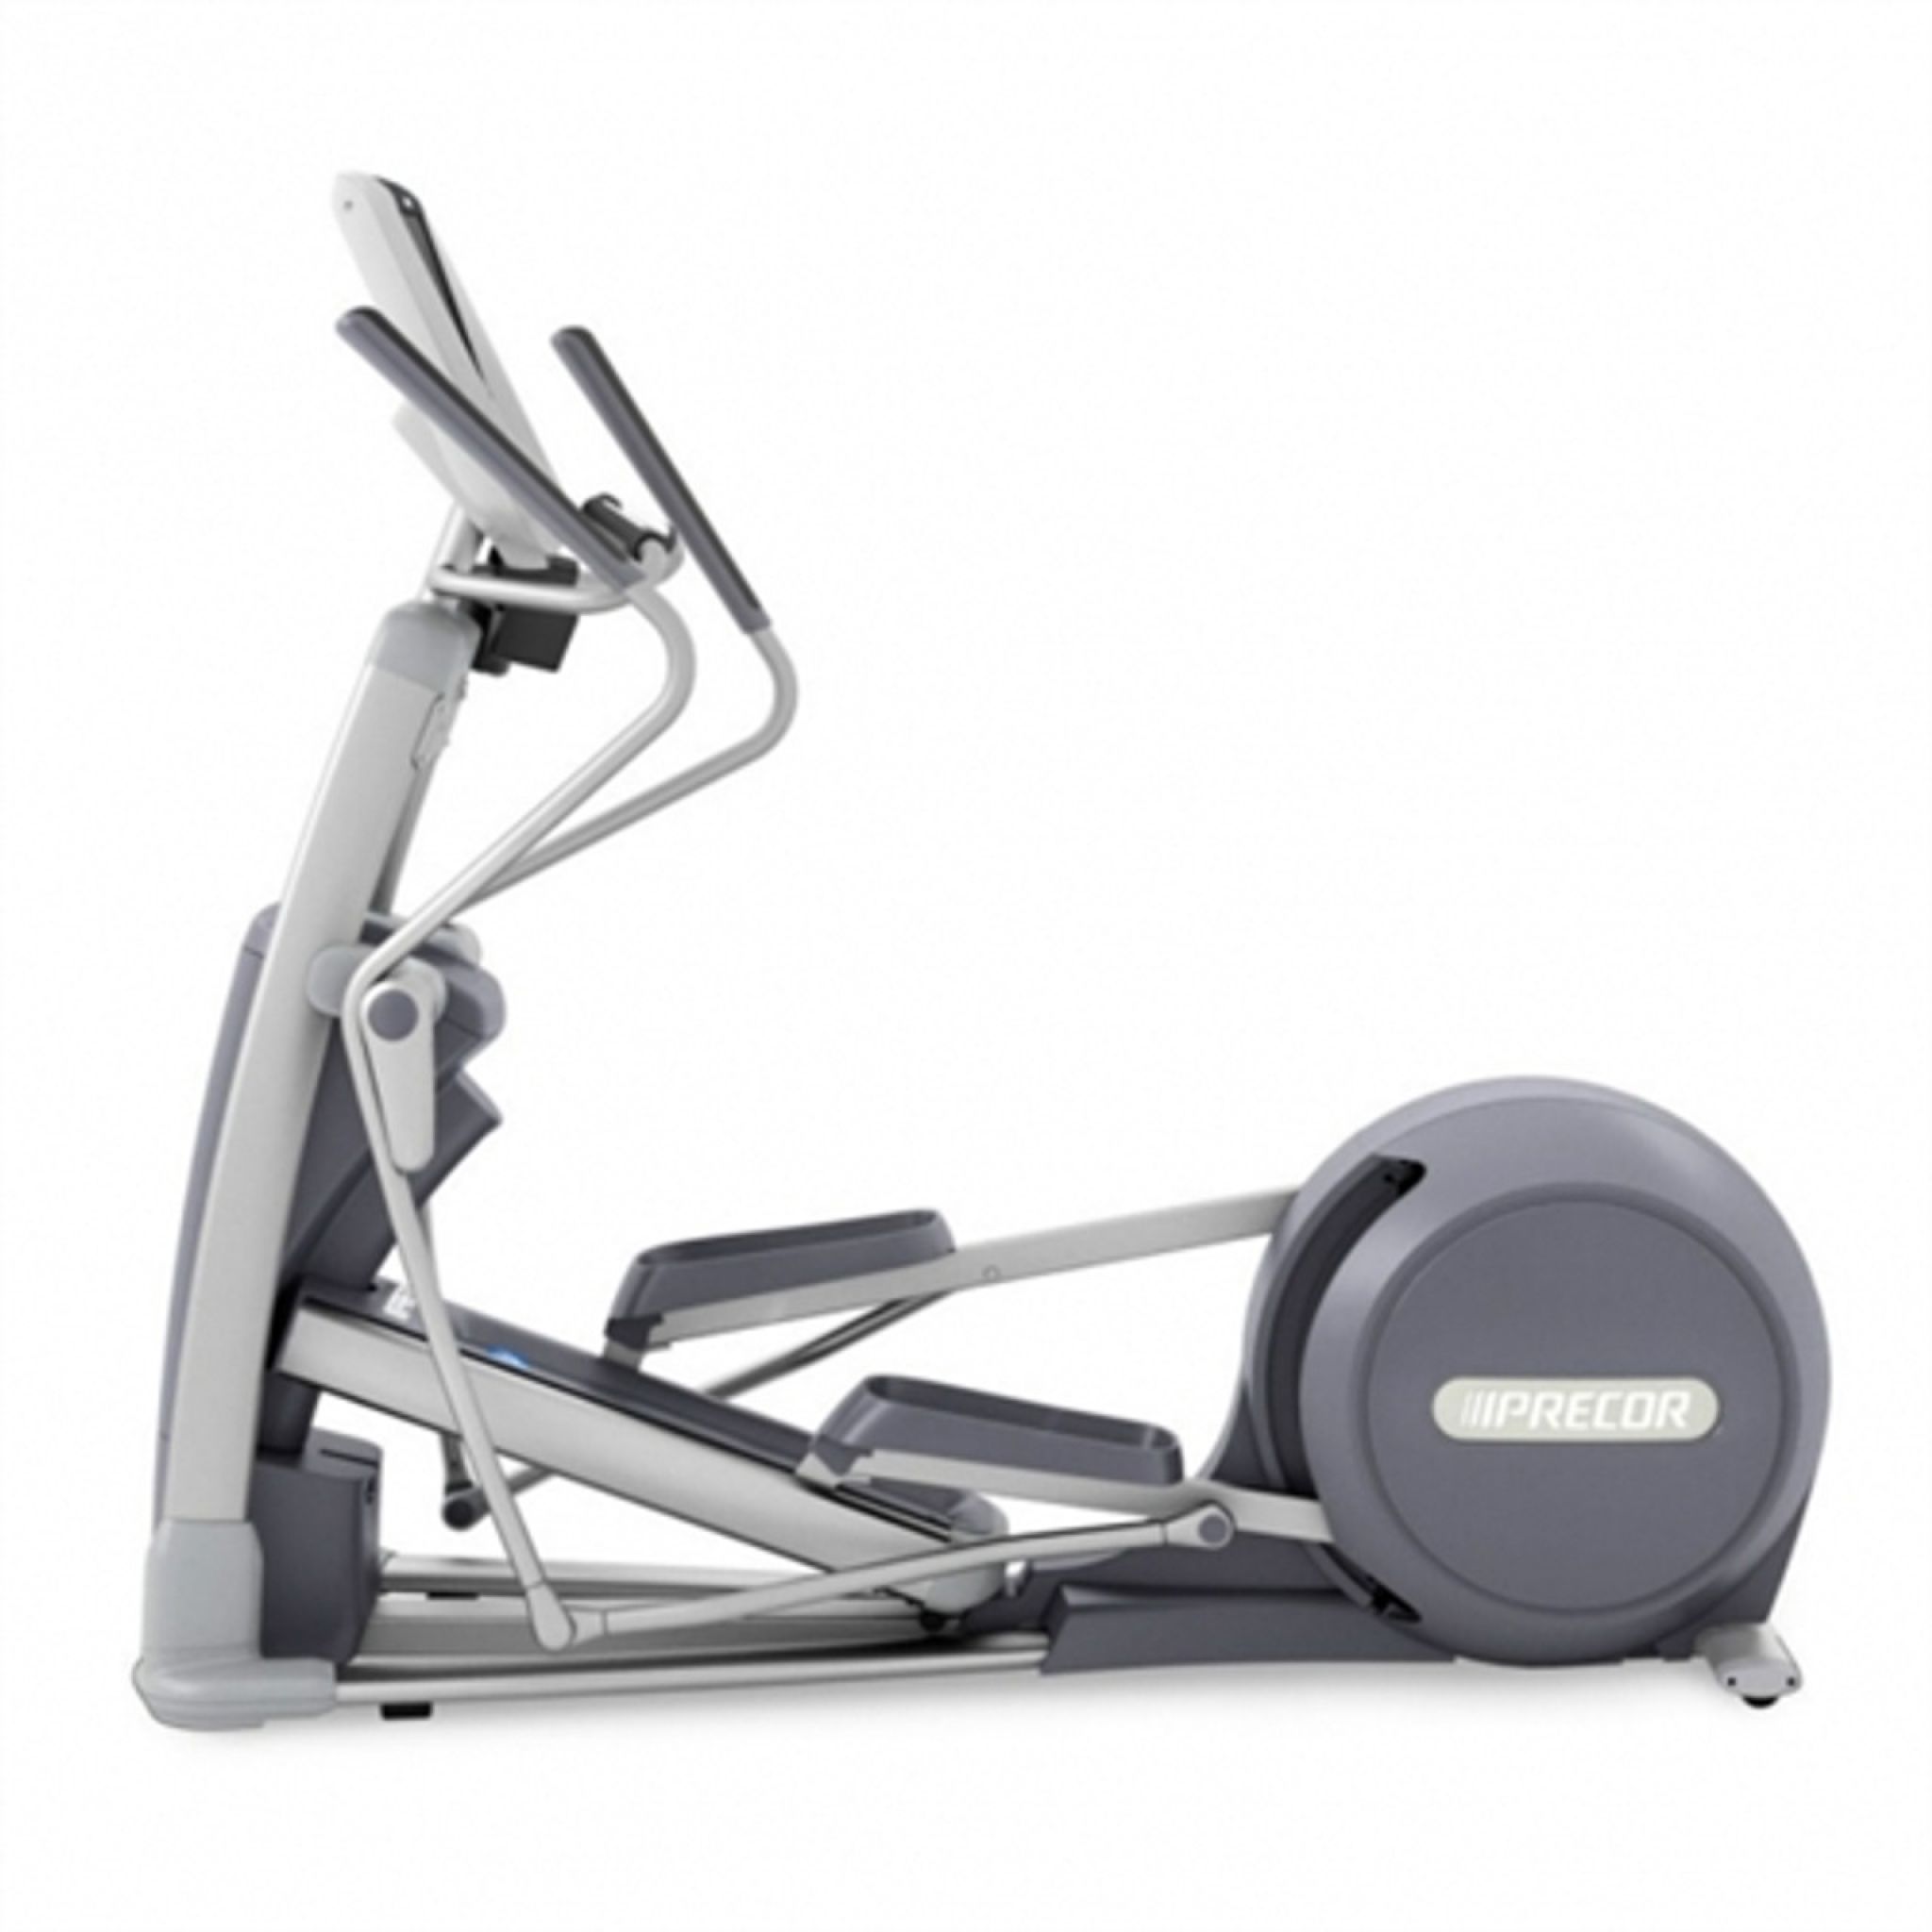 Lefthand view of the Precor EFX 885 Elliptical with p80 Console